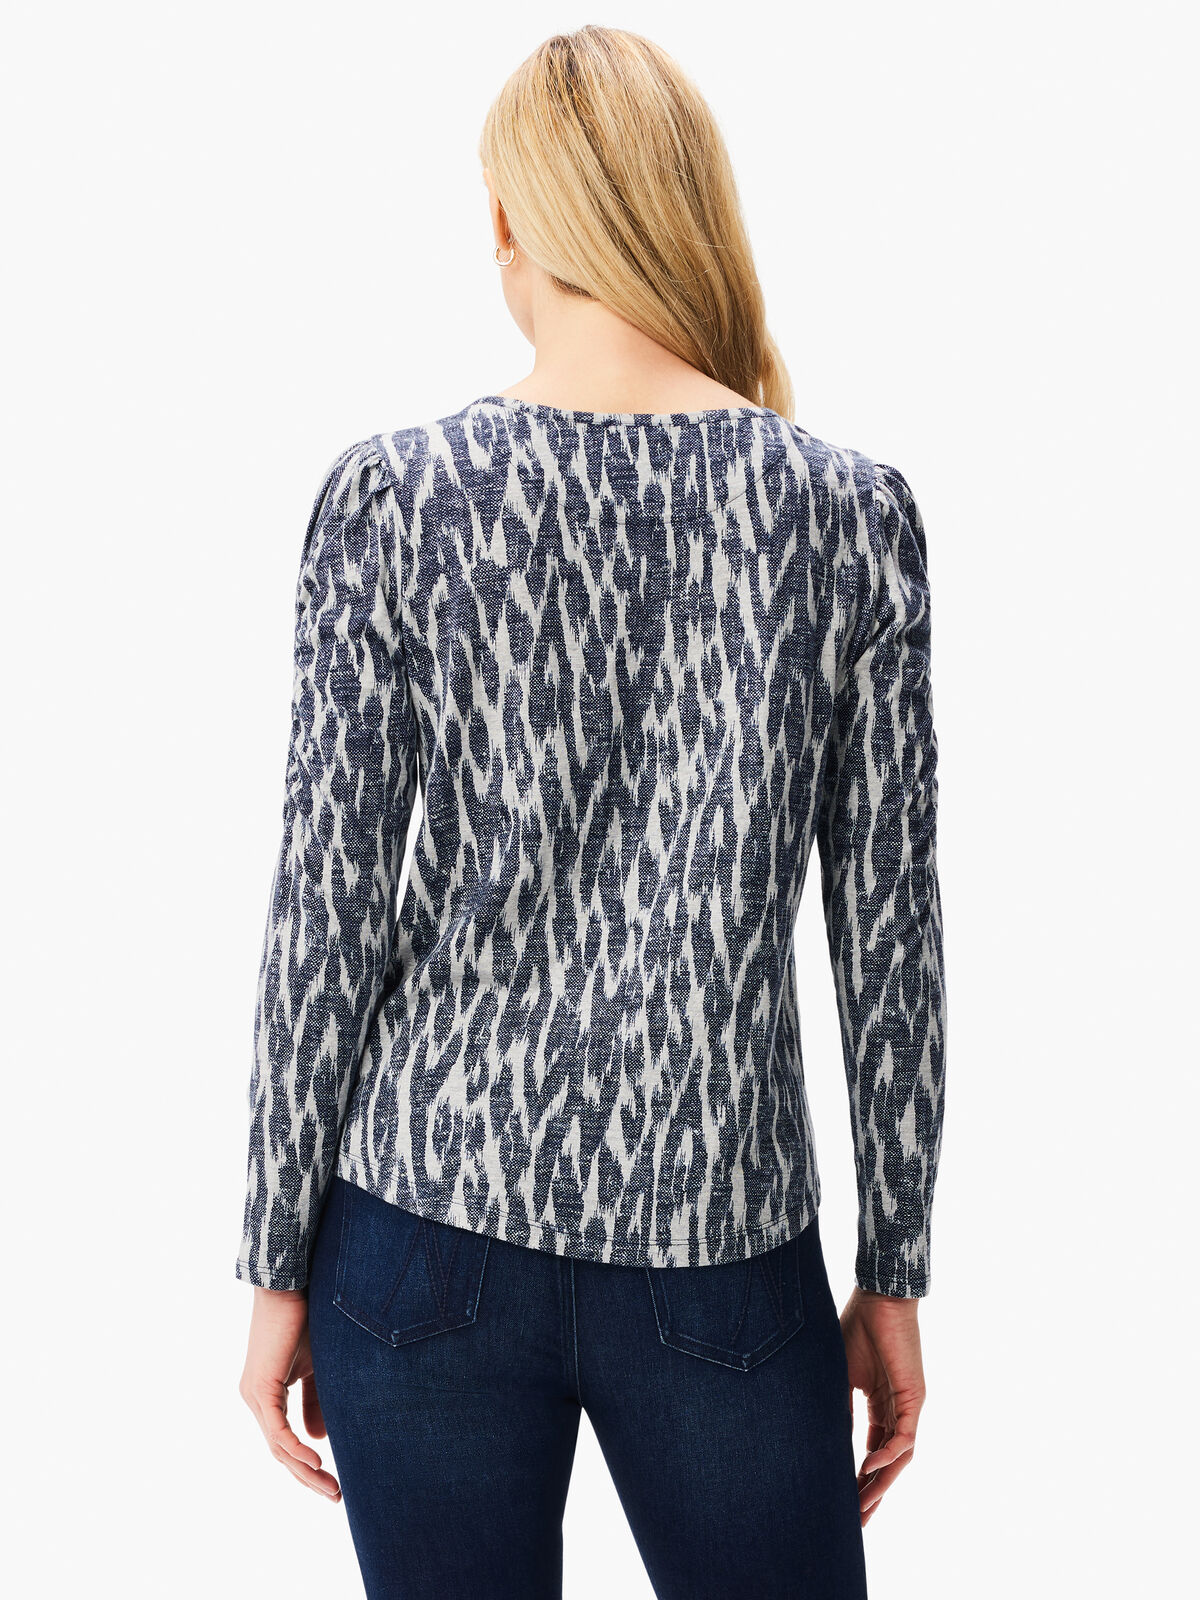 NZT Ikat Long Sleeve Ruched Tee